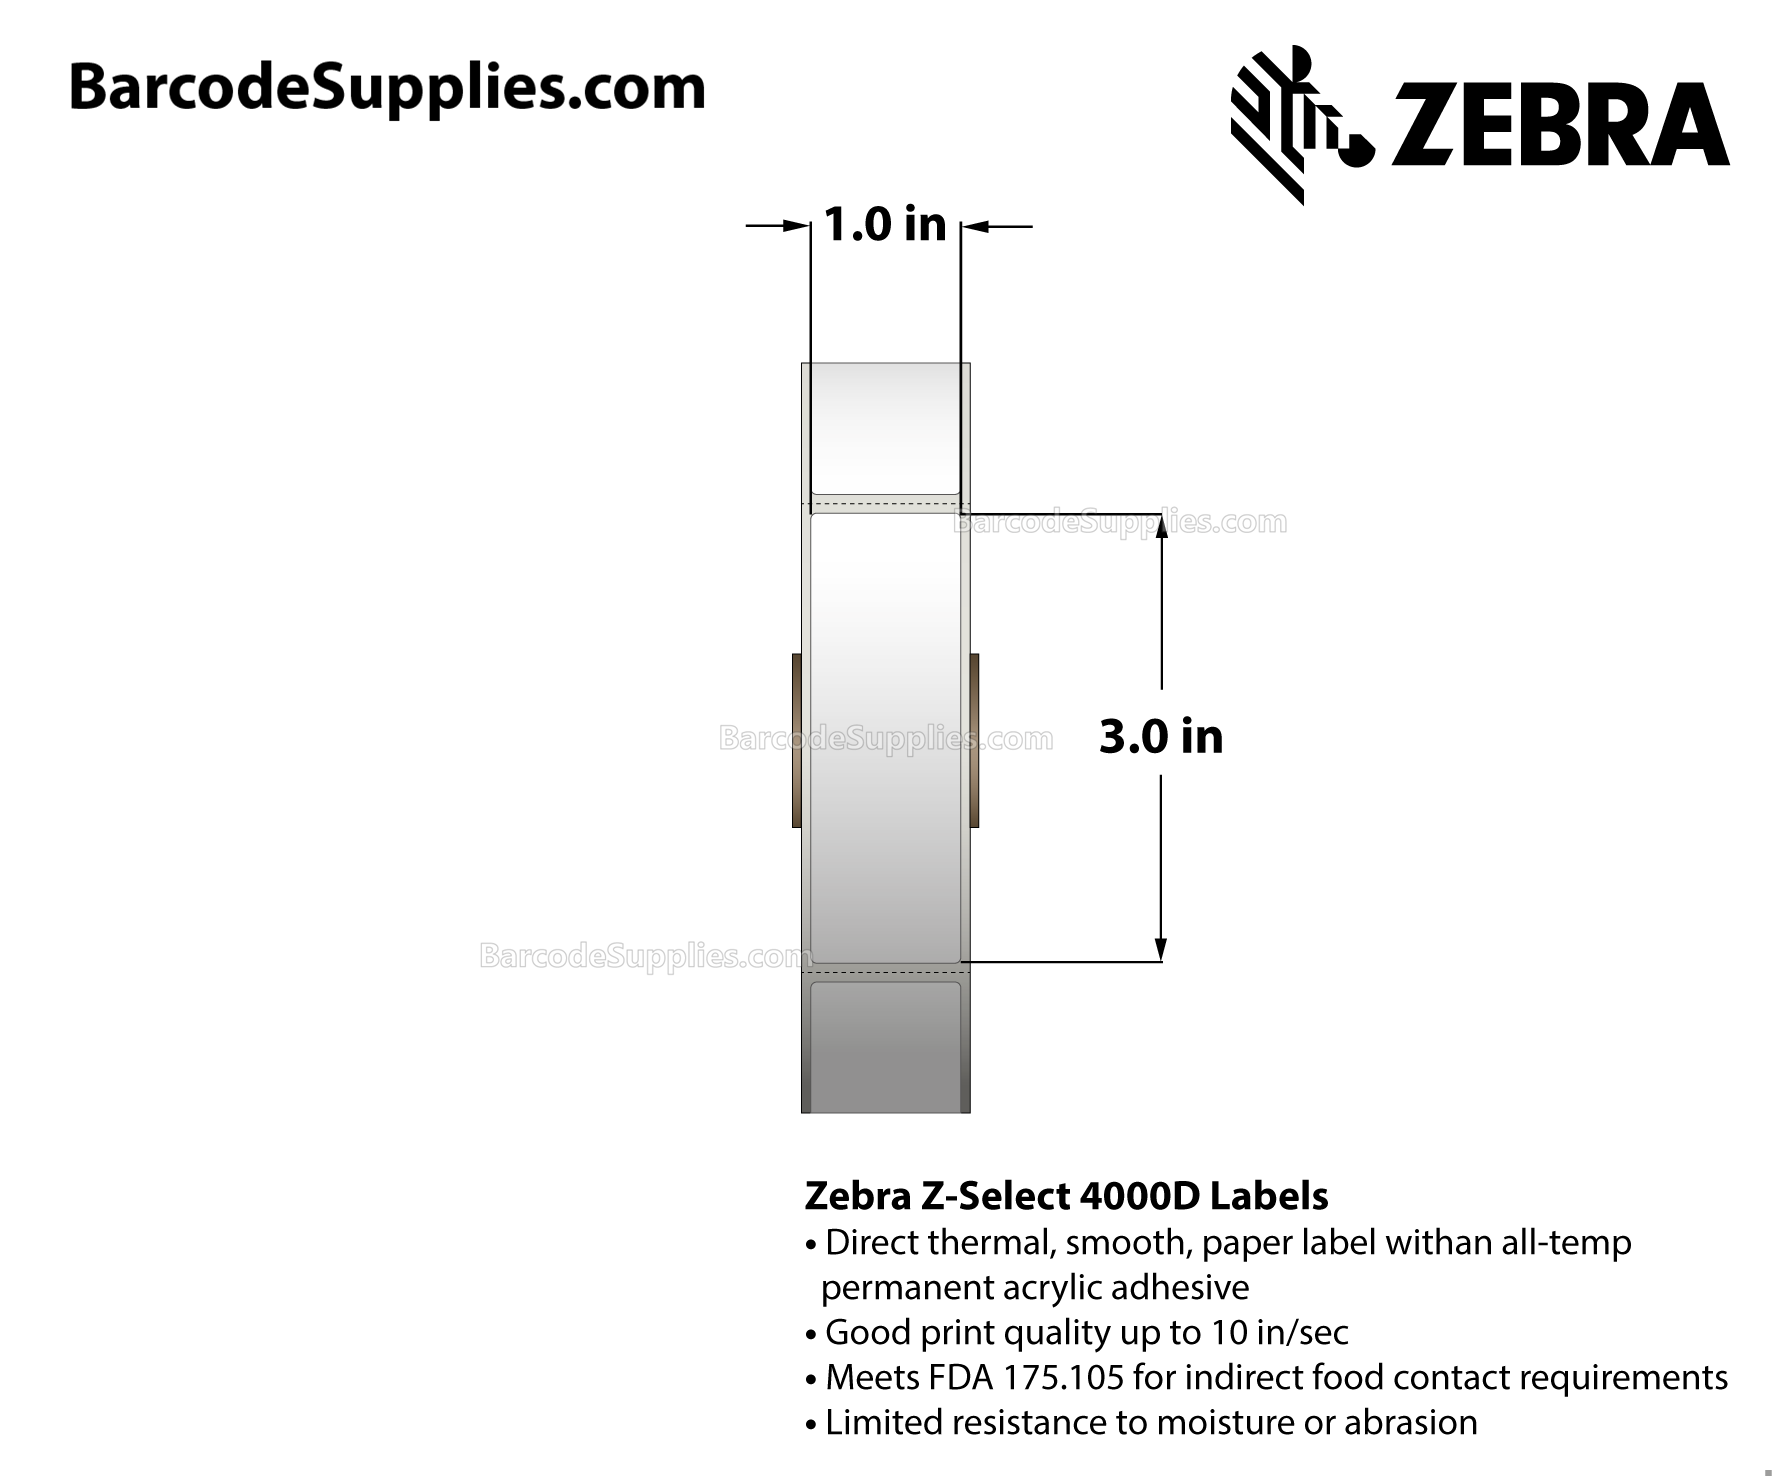 1 x 3 Direct Thermal White Z-Select 4000D Labels With All-Temp Adhesive - Perforated - 840 Labels Per Roll - Carton Of 6 Rolls - 5040 Labels Total - MPN: 10010036